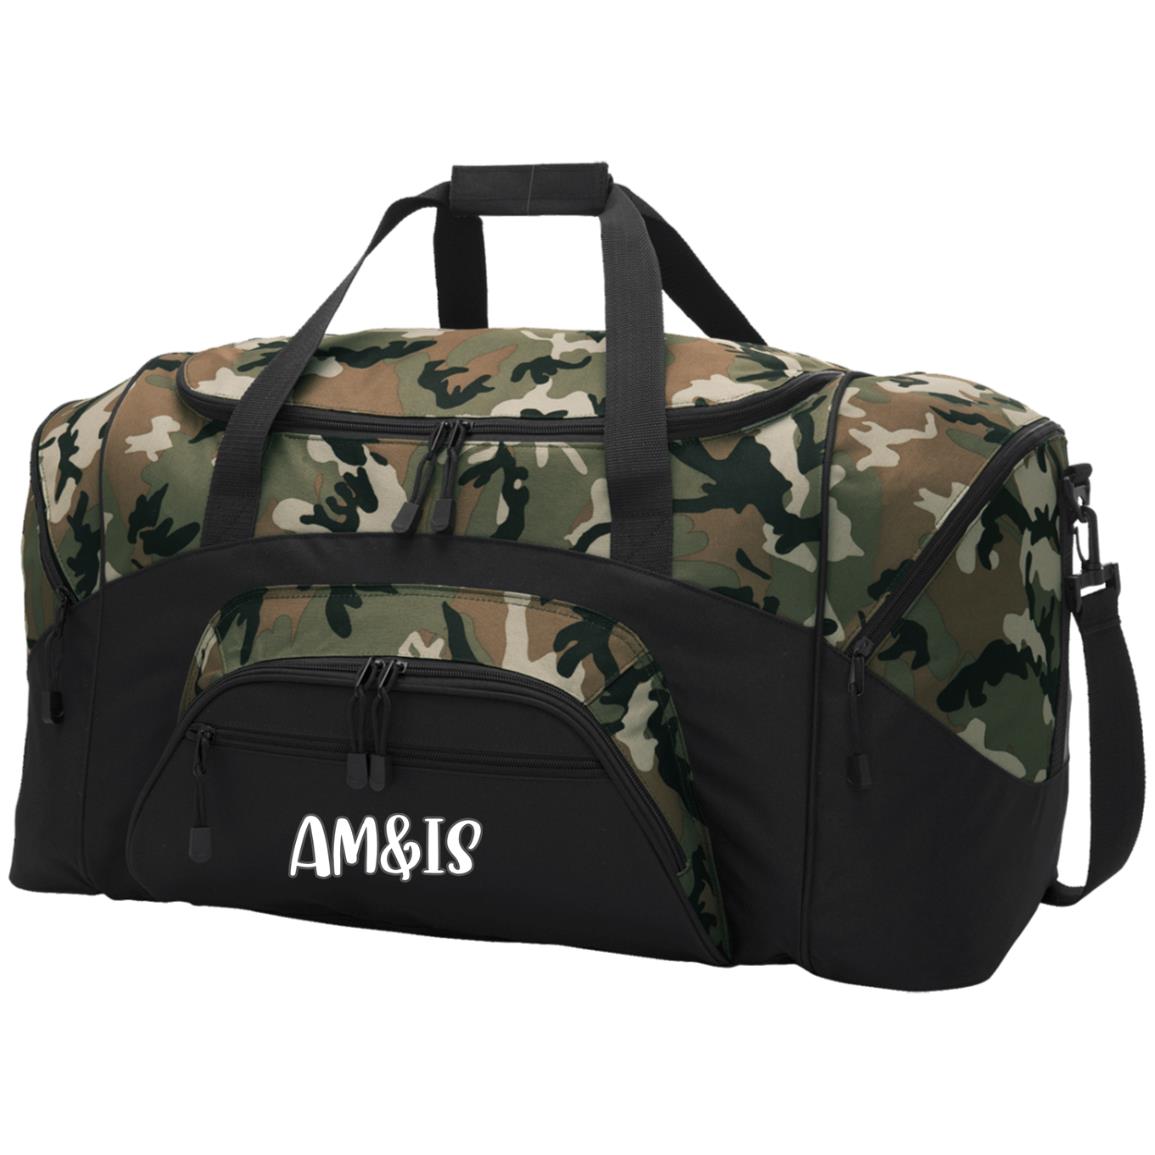 BLACK CAMOUFLAGE ONE SIZE - AM&IS Activewear Colorblock Sport Duffel - duffel bag at TFC&H Co.